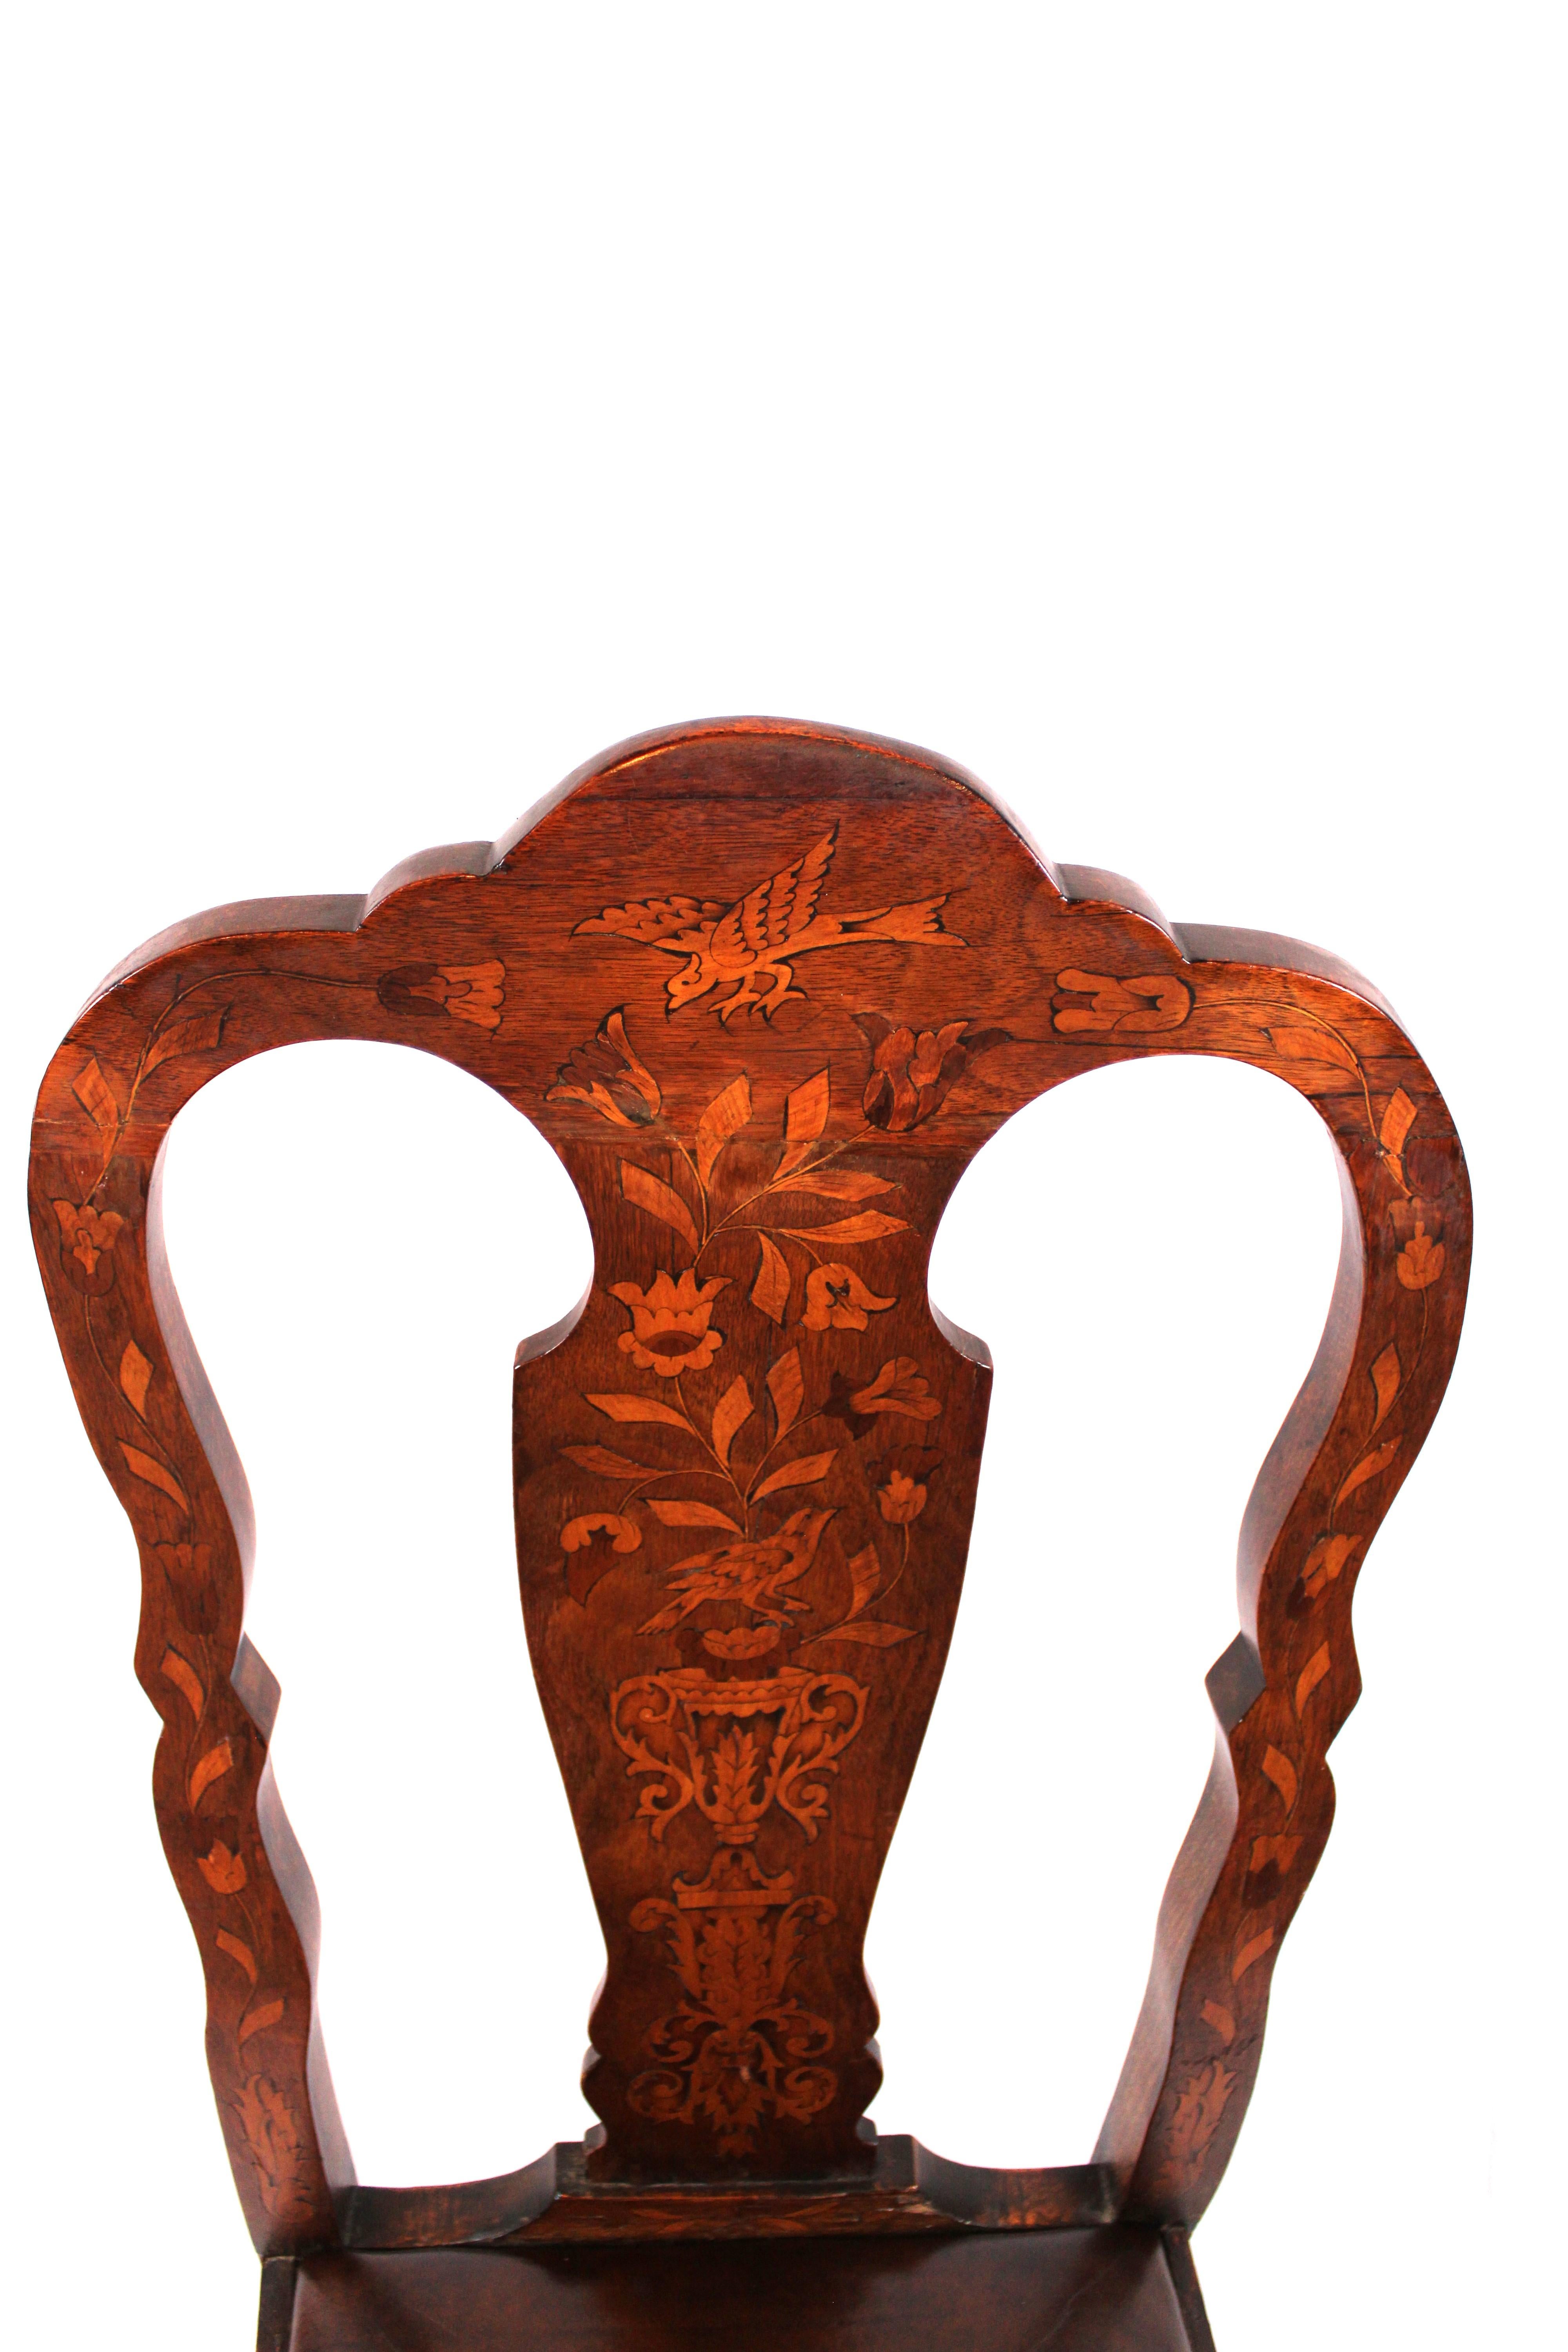 Queen Anne Elegance in Wood: 19th-Century Dutch Marquetry Dining Chairs (Set of 6) For Sale